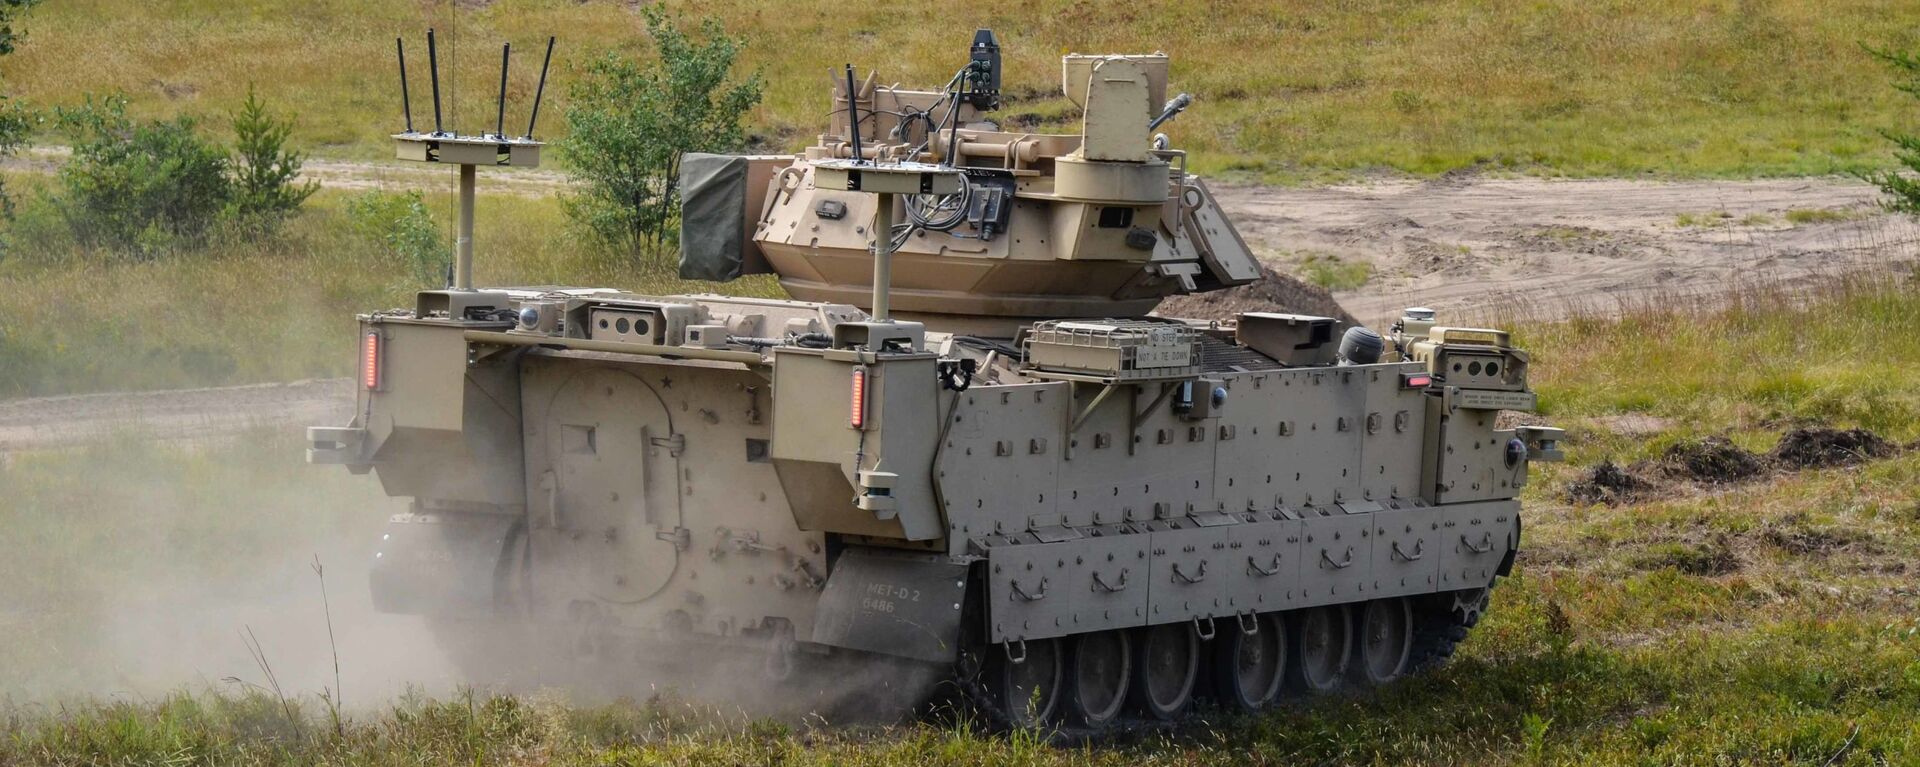 Modified Bradley Fighting Vehicles known as Mission Enabling Technologies Demonstrators (MET-D) and modified M113 tracked armored personnel carriers, known as Robotic Combat Vehicles (RCVs) are being utilized in a soldier operation experimentation at Ft. Carson, Col., from June 15 – Aug. 14, 2020. - Sputnik International, 1920, 26.06.2023